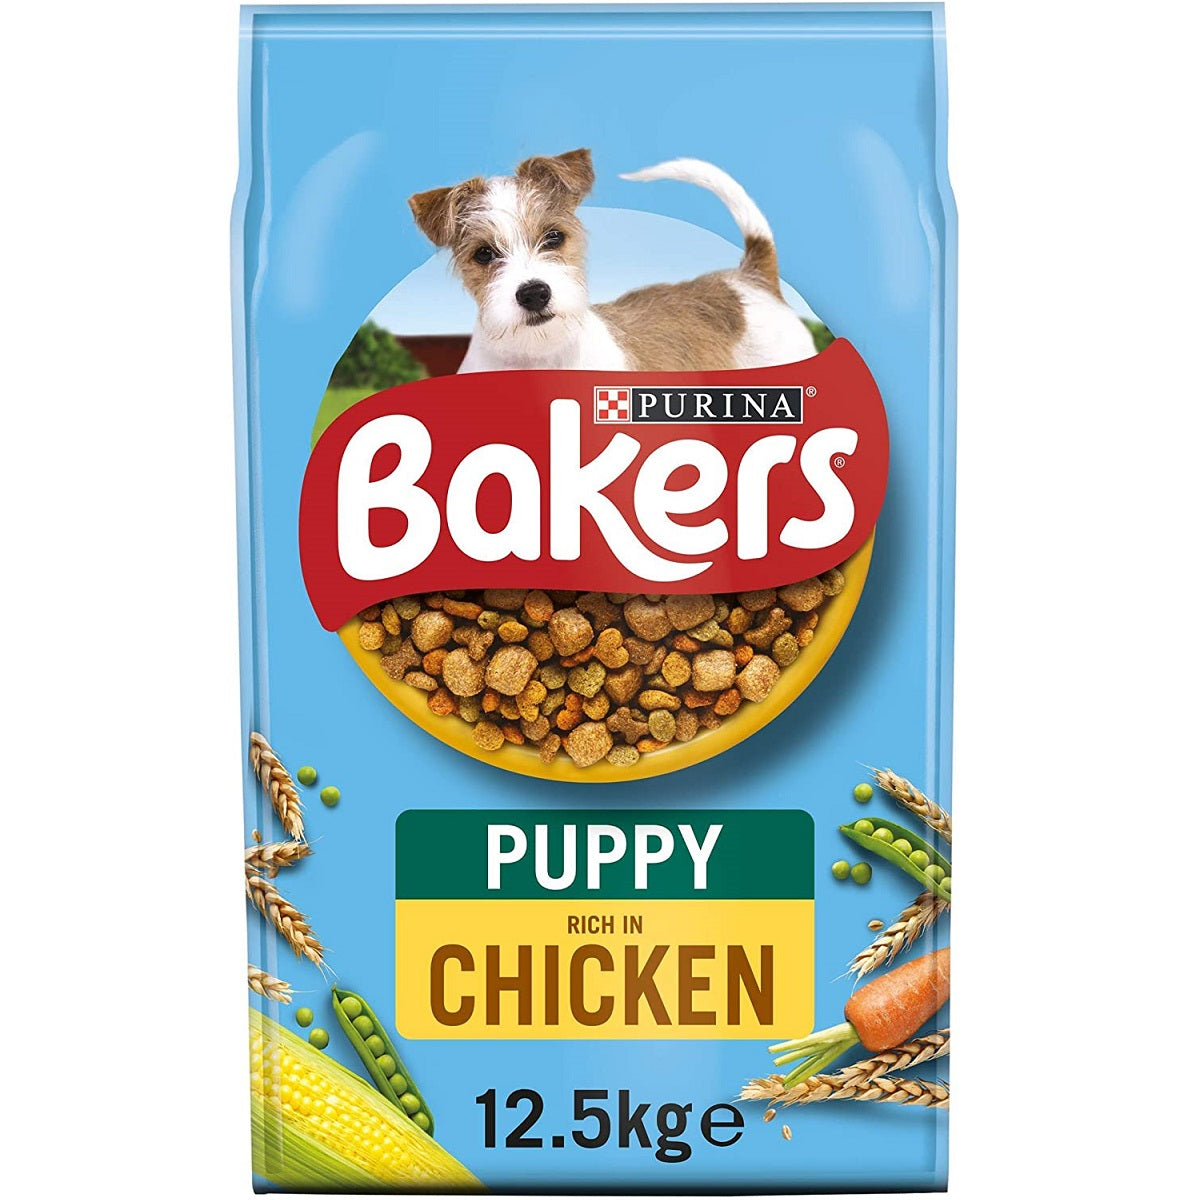 Bakers - Puppy